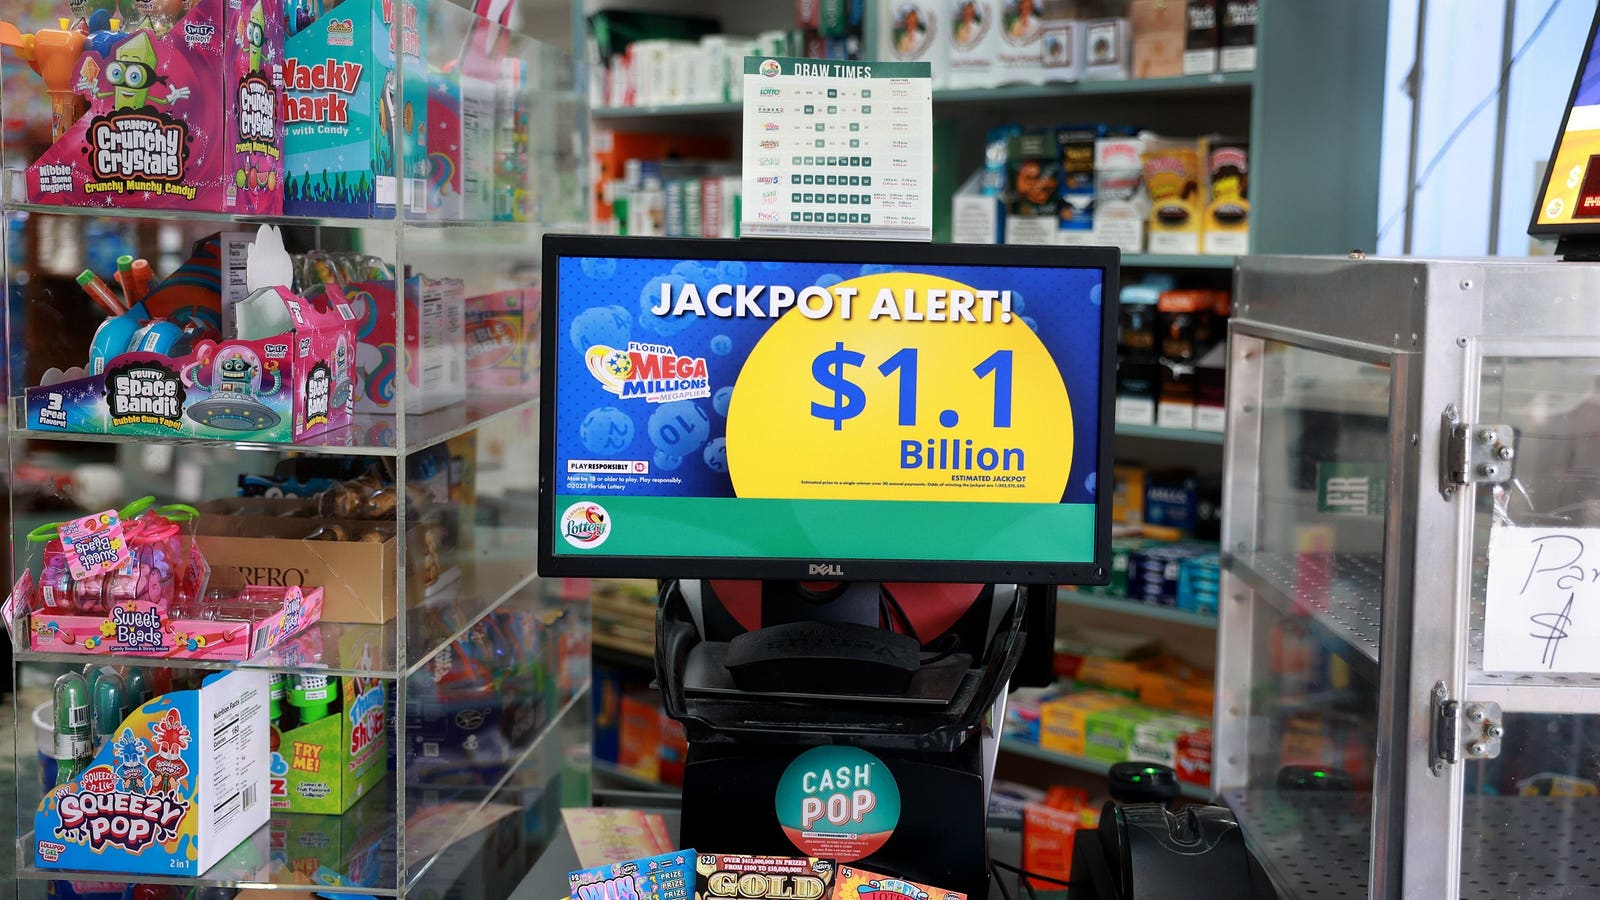 Ticket Buyer From New Jersey Wins $1.13 Billion Mega Millions Jackpot-Here’s What They Will Take Home After Taxes